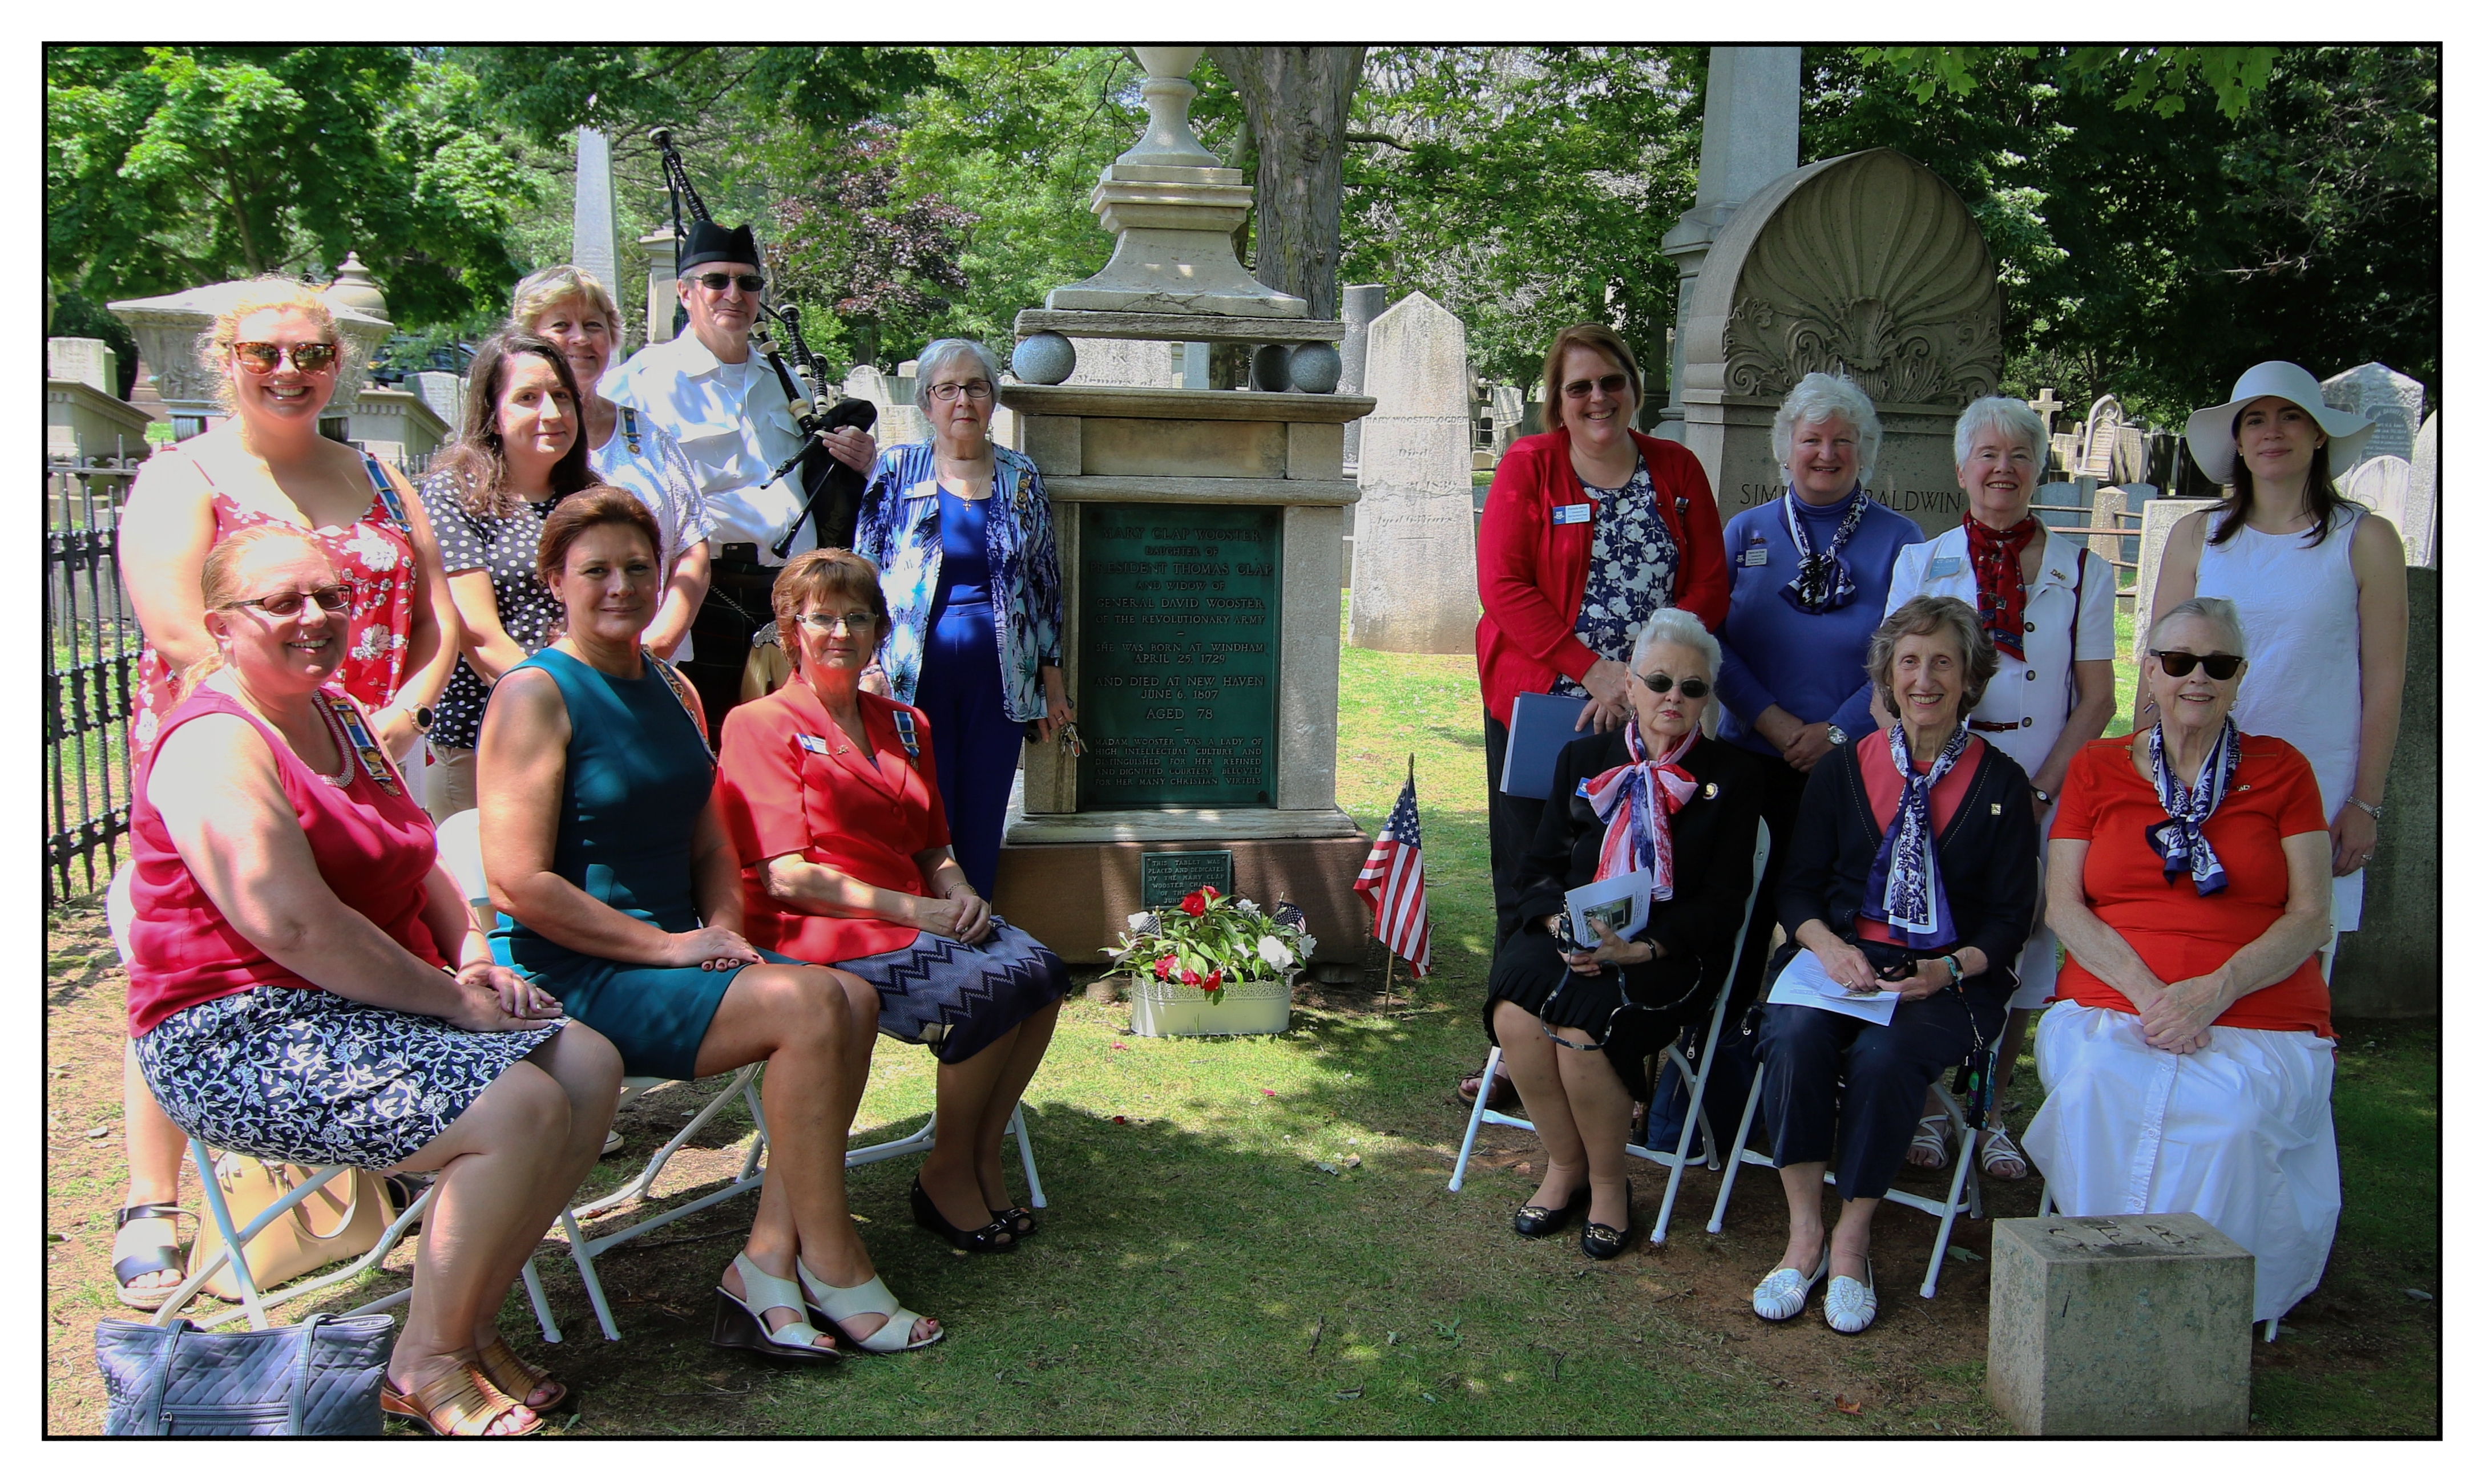 Chapter with Patricia Buxton and piper at Mary Clap Wooster Chapter NSDAR monument rededication, June 22, 2019.